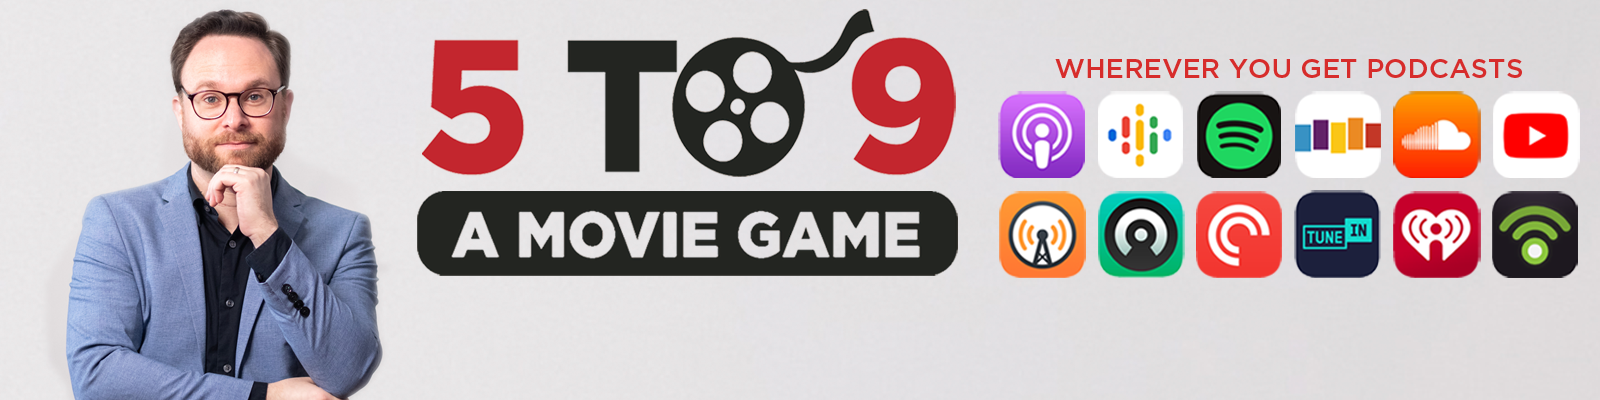 5 to 9 – A Movie Game